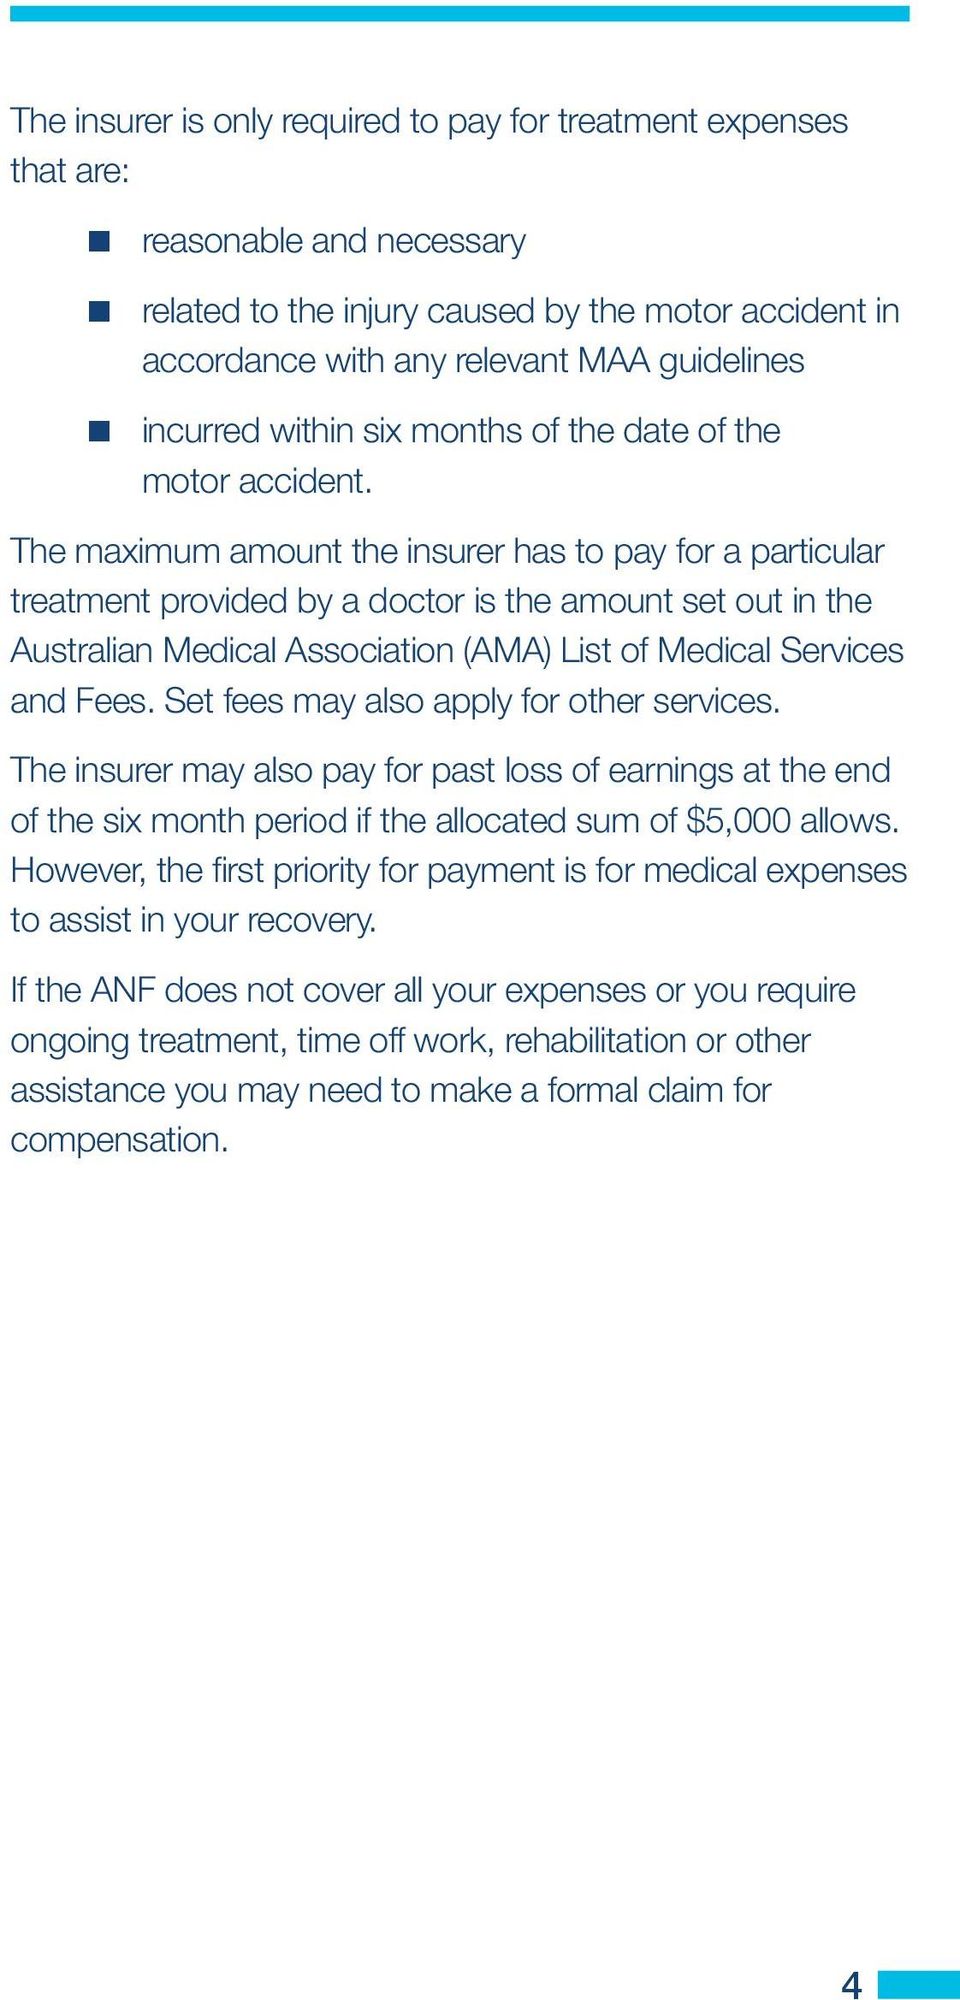 The maximum amount the insurer has to pay for a particular treatment provided by a doctor is the amount set out in the Australian Medical Association (AMA) List of Medical Services and Fees.